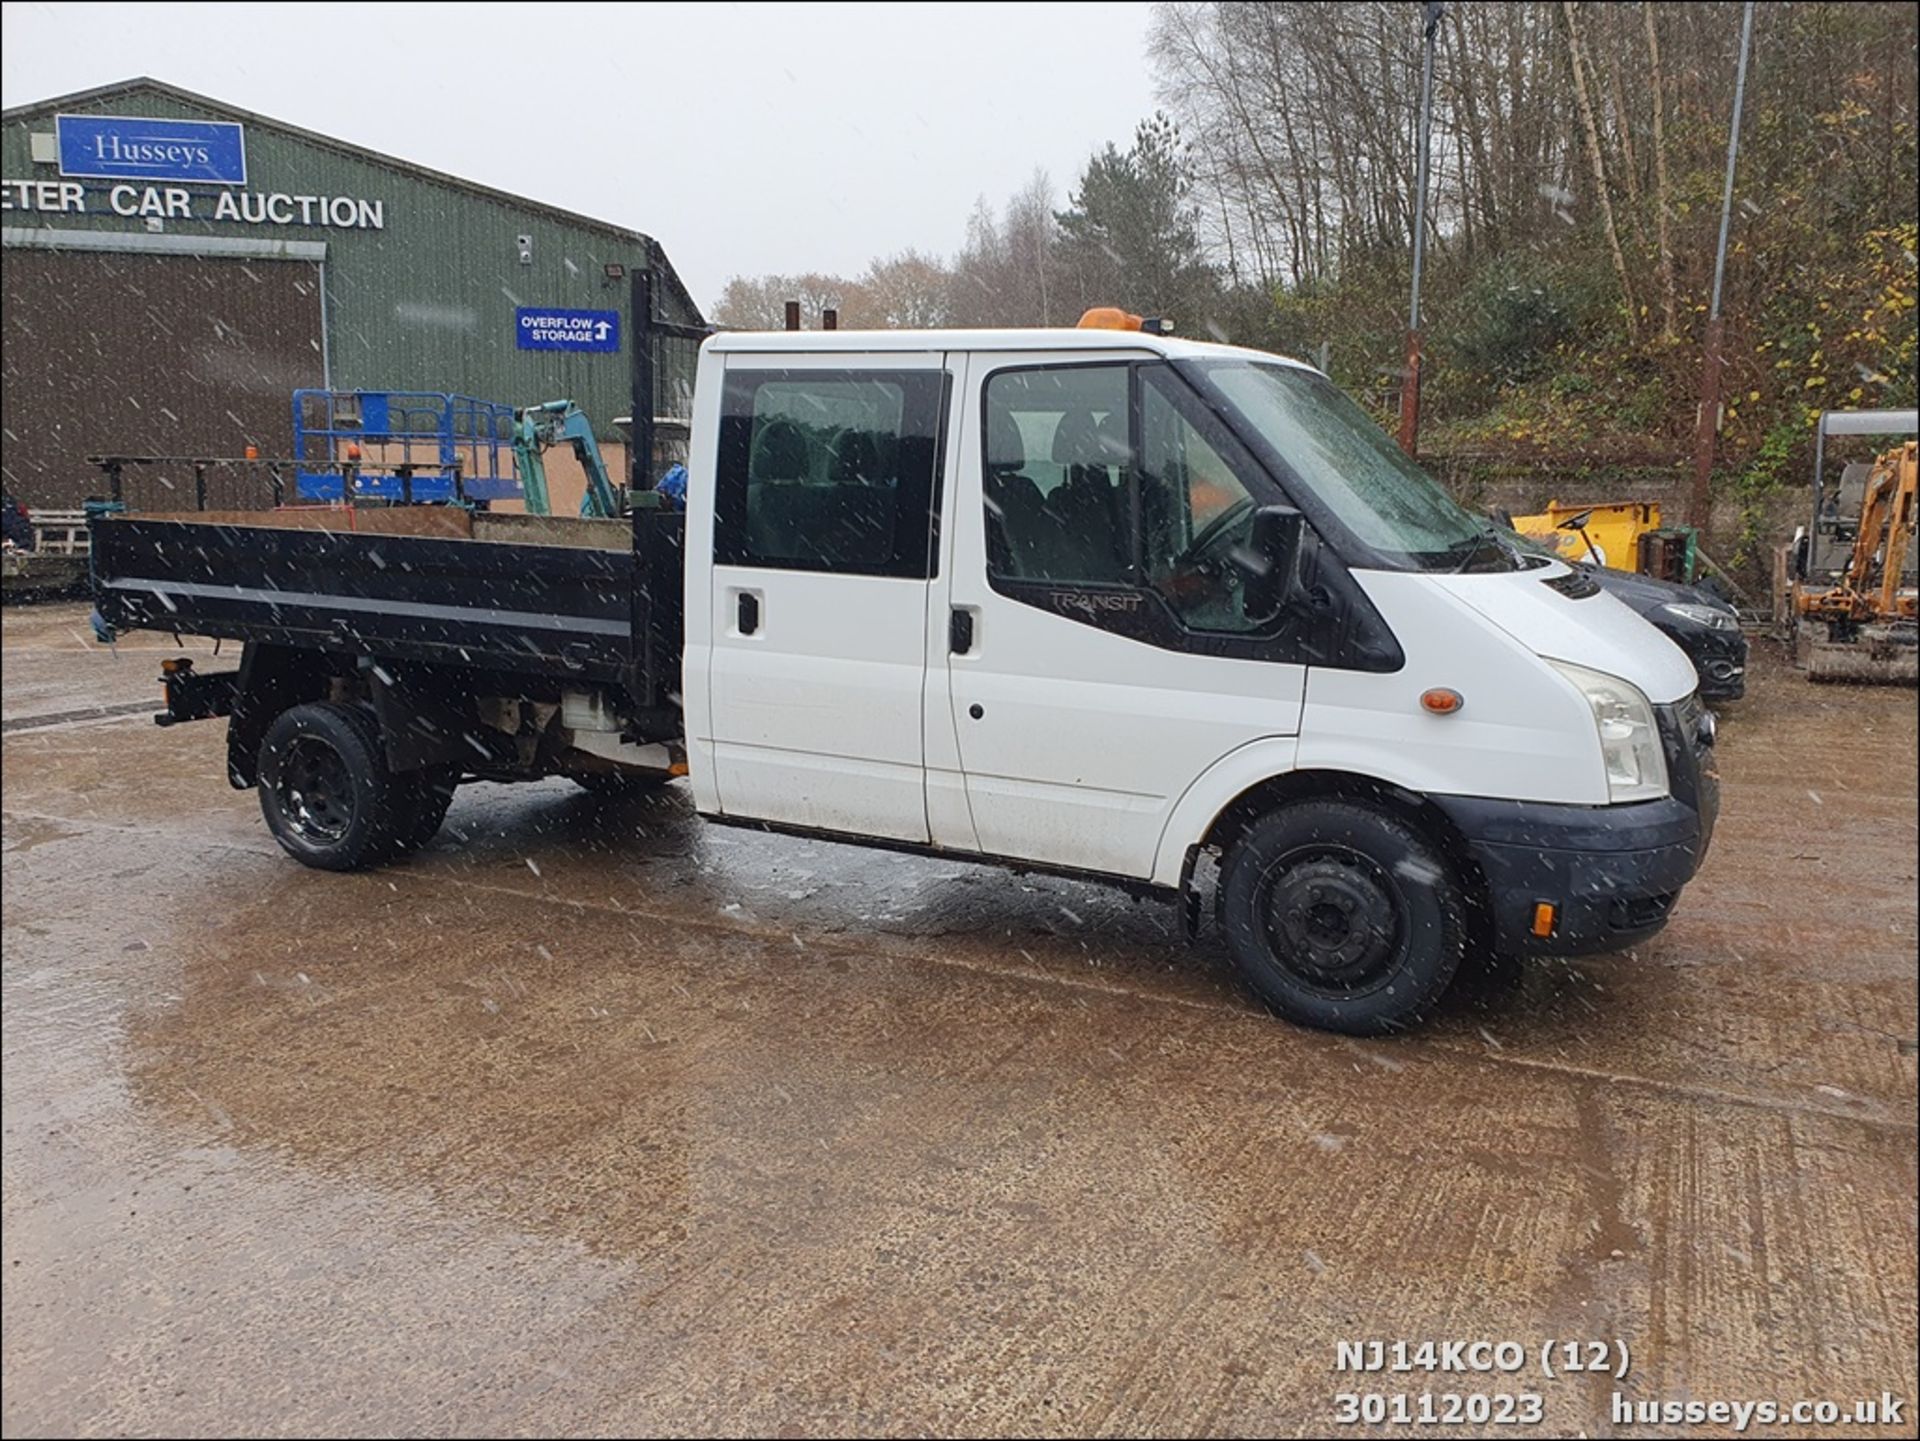 14/14 FORD TRANSIT 100 T350 RWD - 2198cc 4dr Tipper (White, 75k) - Image 13 of 51